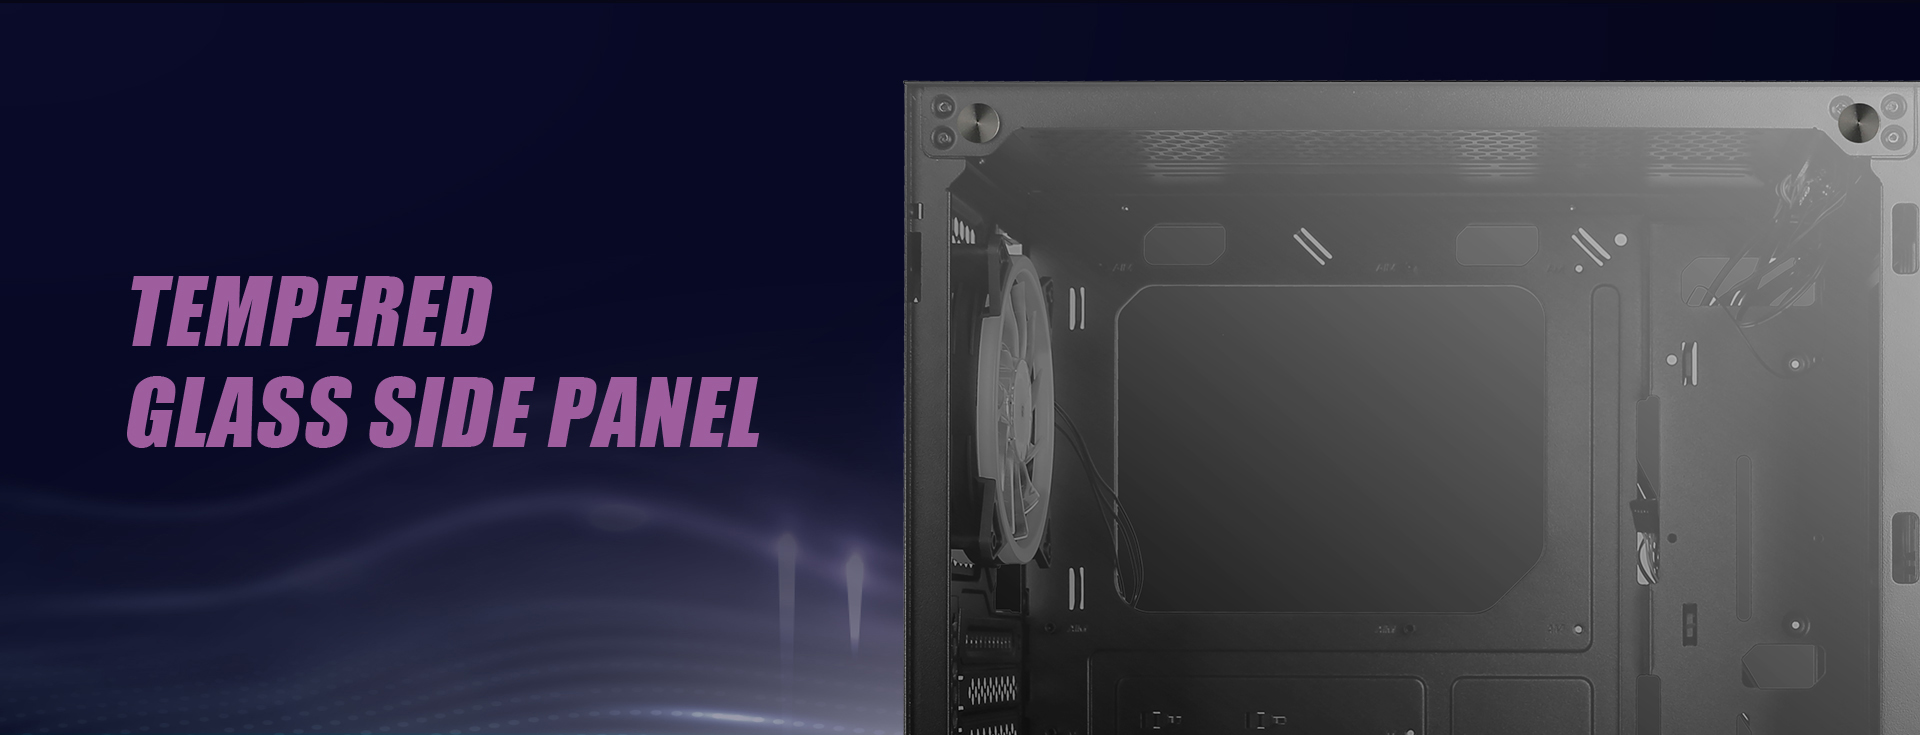 Antec NX Series NX400 tempered glass side panel